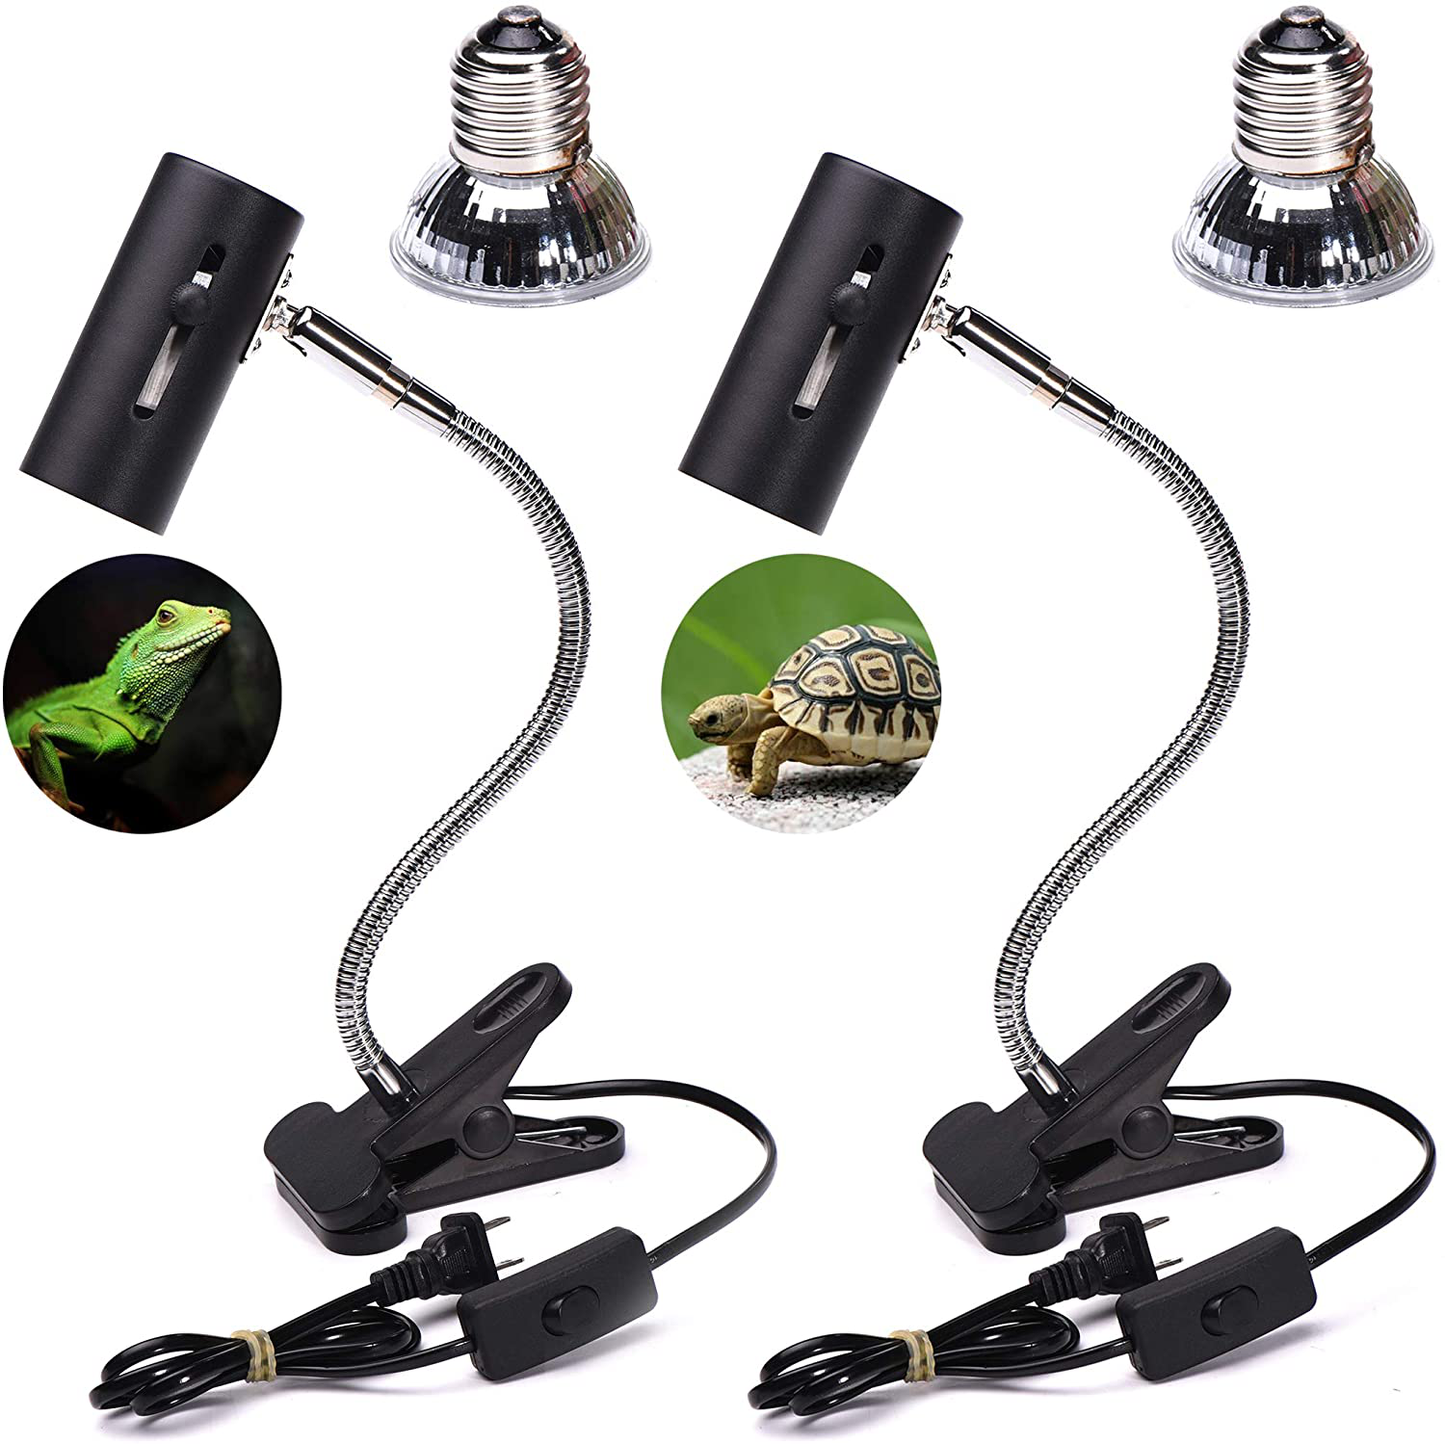 Calpalmy 25W Reptile UVA/UVB Lamp - with Lengthened Adjustable Feature | Adjustable Stand - for Bird Lizard Turtle Snake Aquarium Habitat Heat Lamps & Light Bulbs - 2-Pack